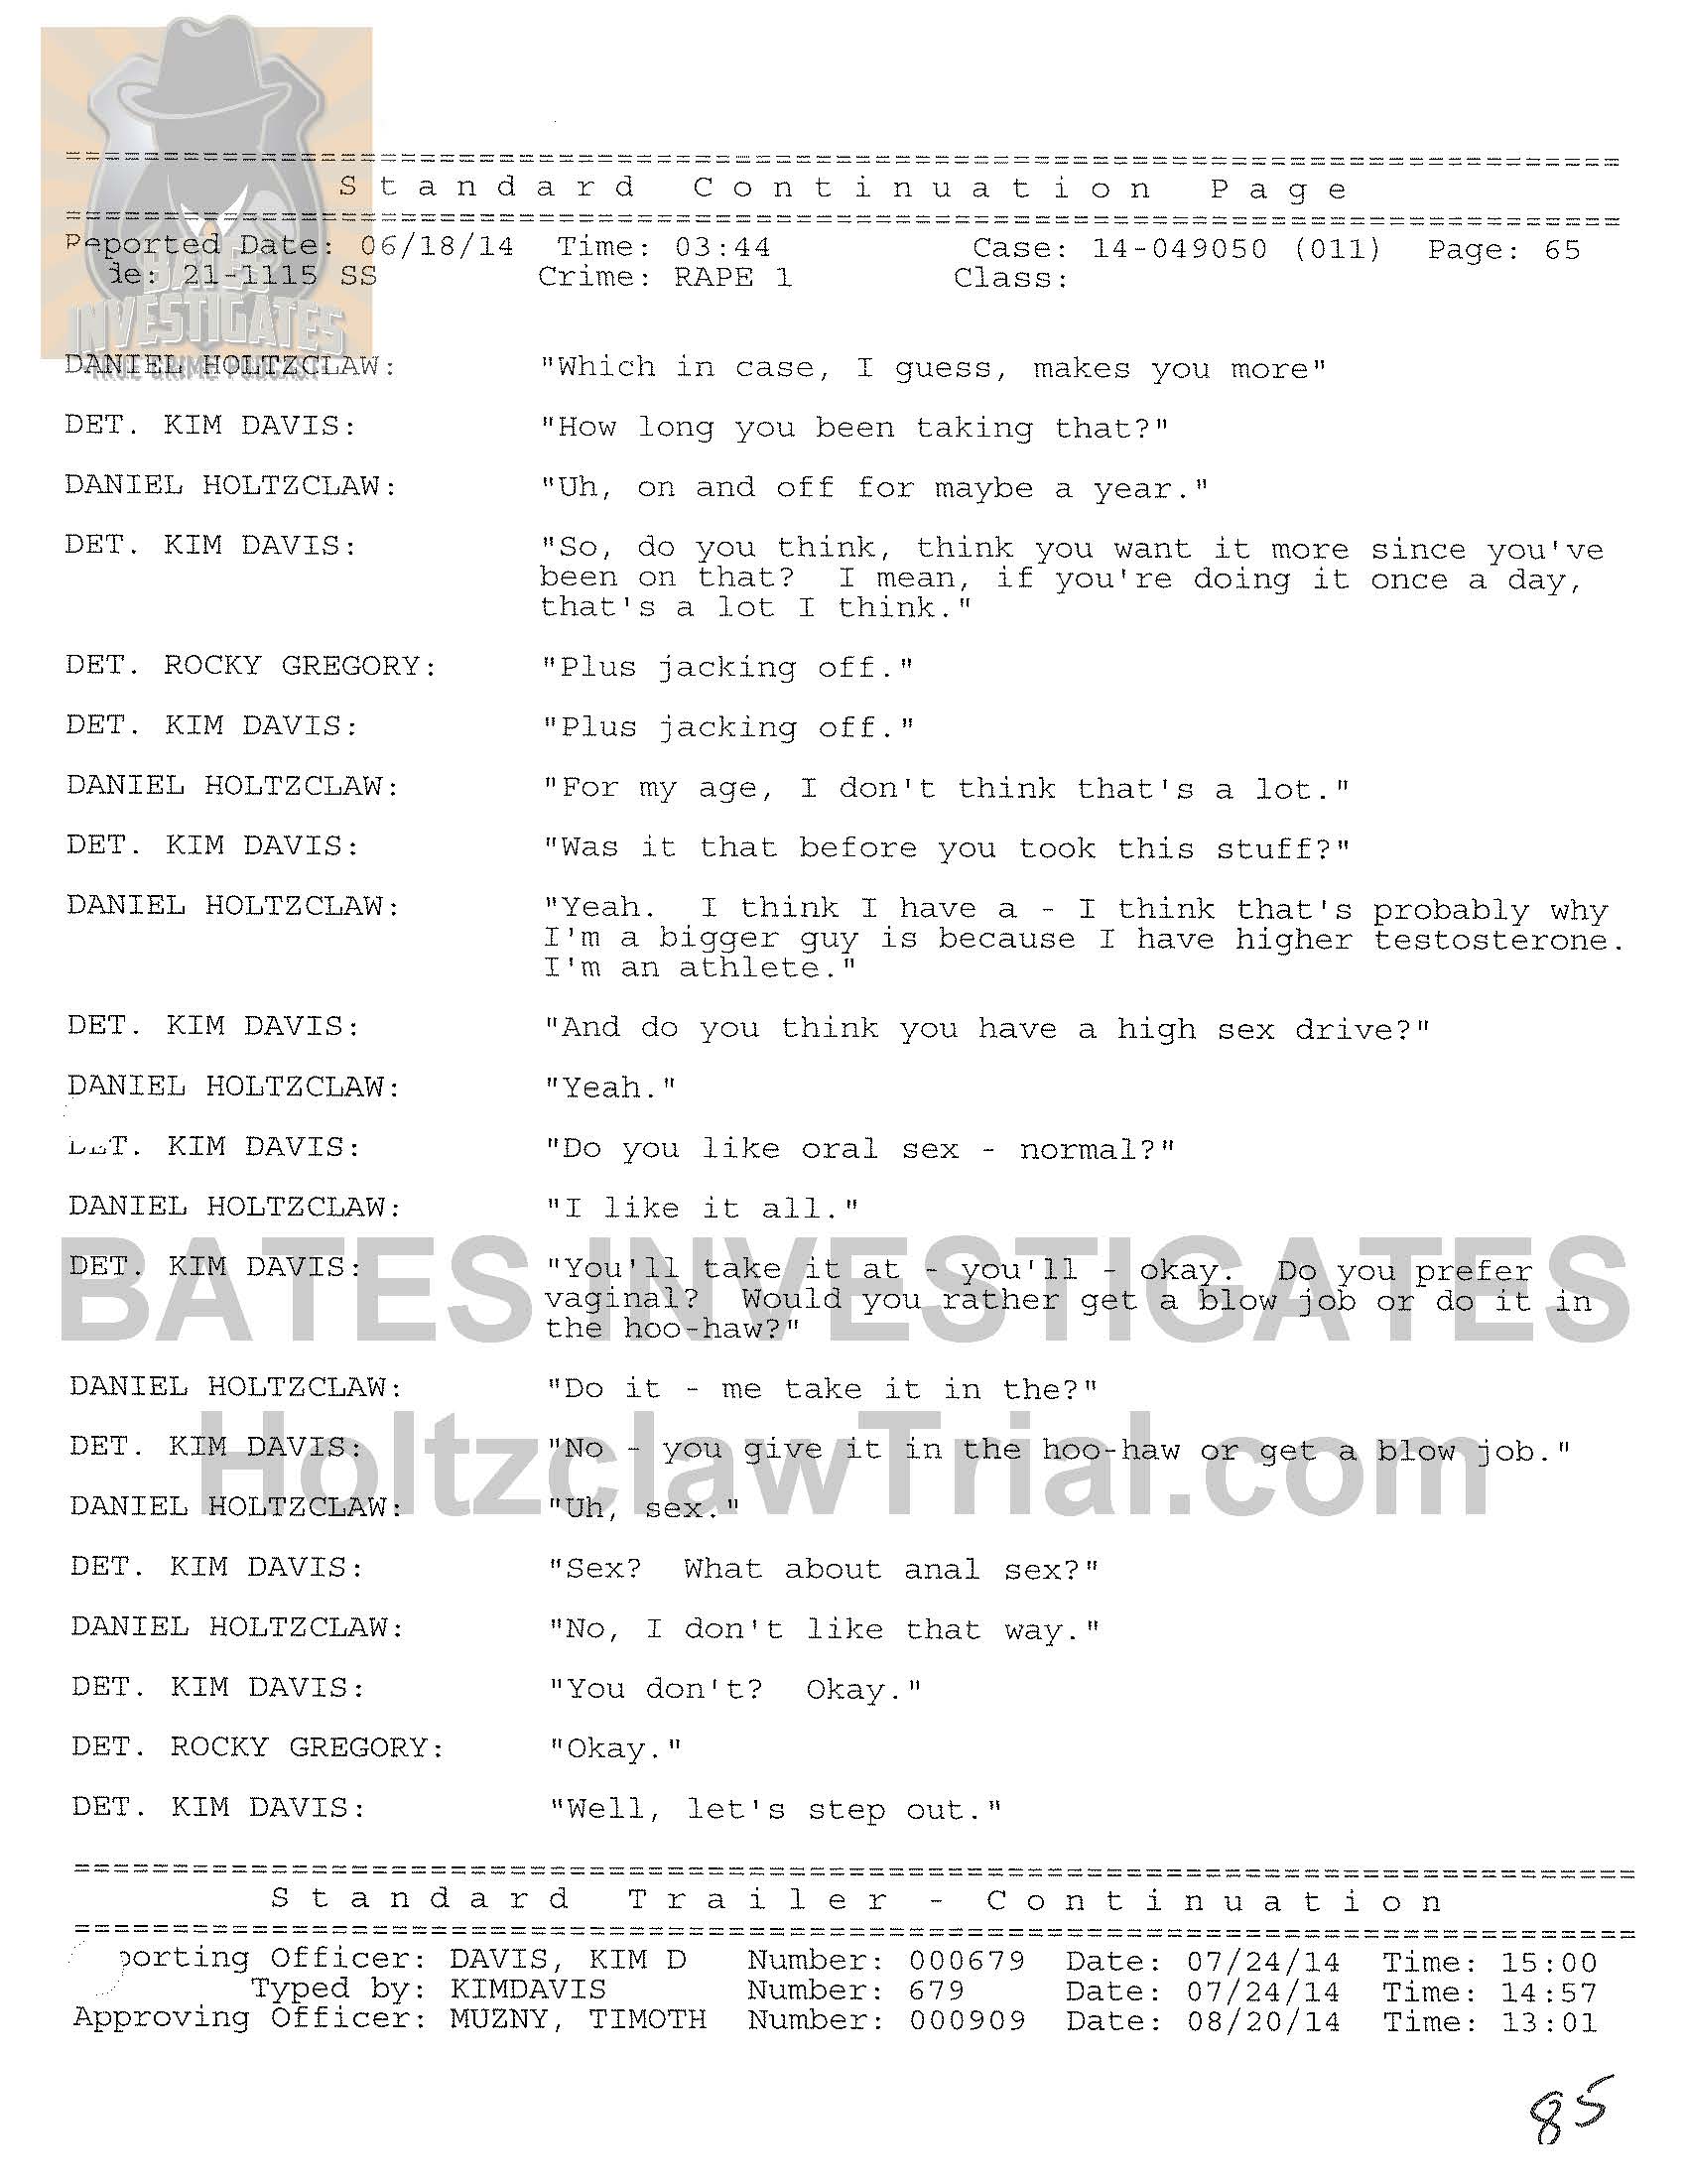 Holtzclaw Interrogation Transcript - Ep02 Redacted_Page_65.jpg